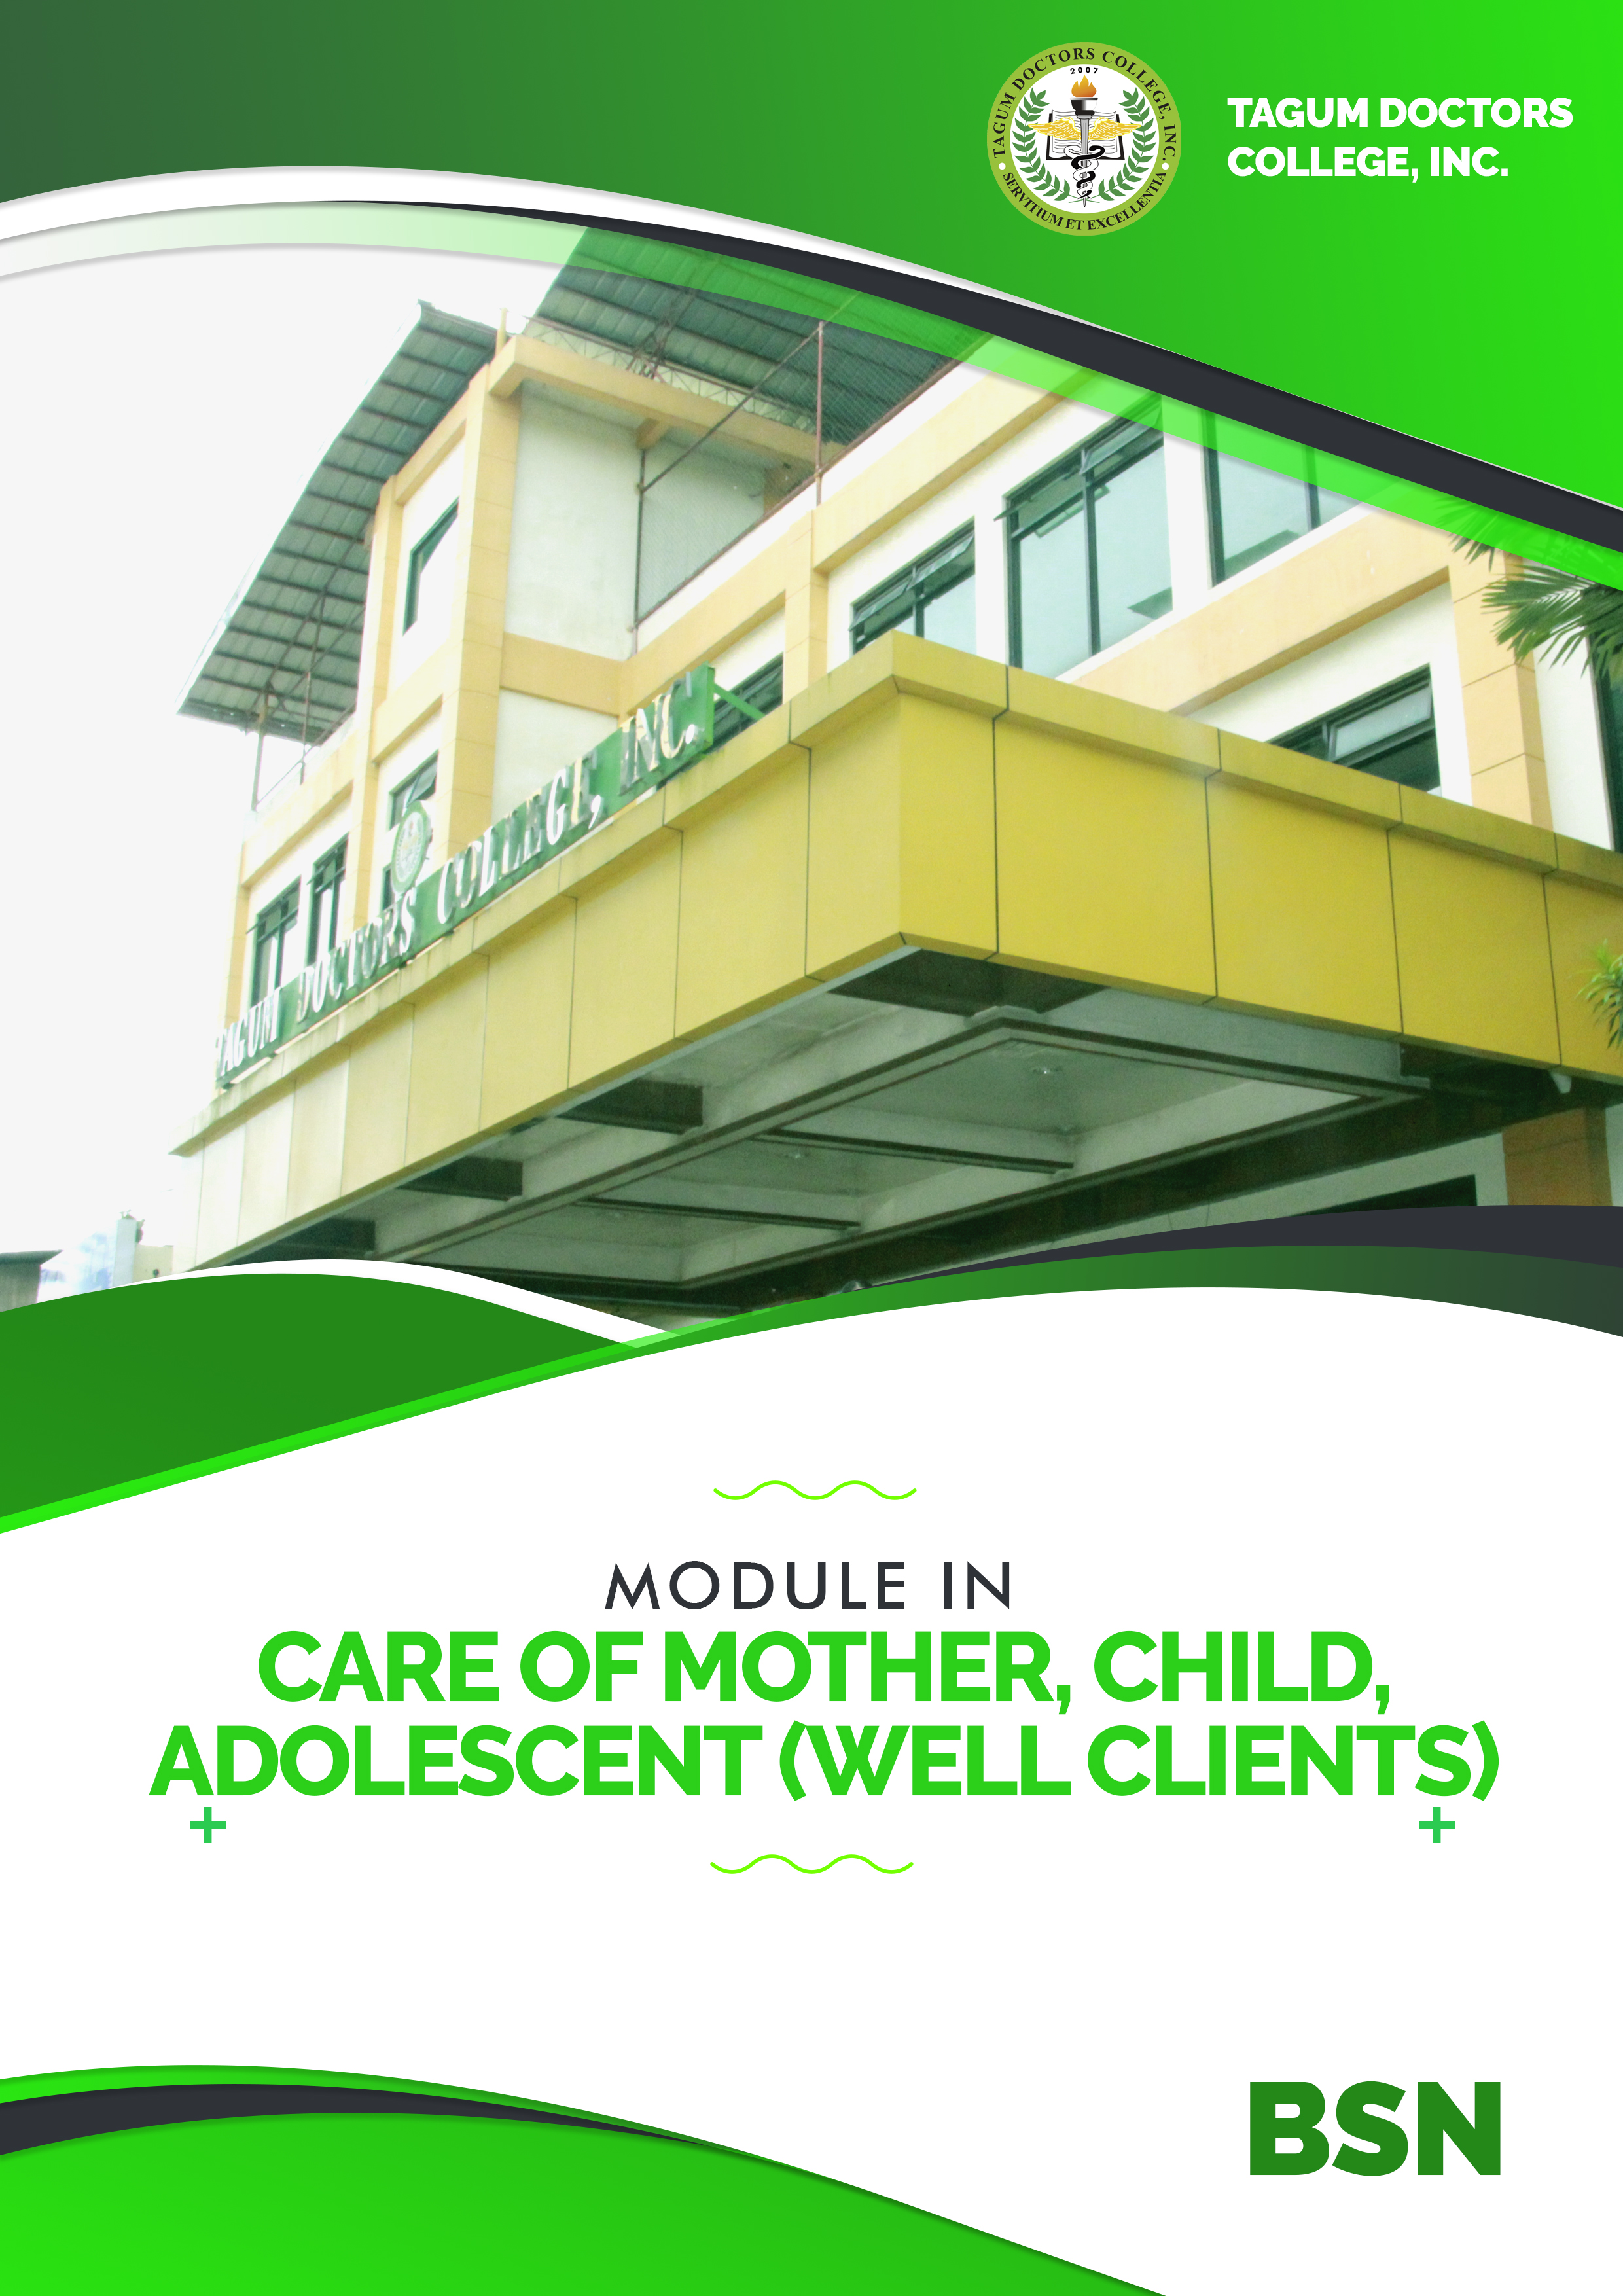 Care of Mother, Child, Adolescent (Well Clients) - BSN 2A